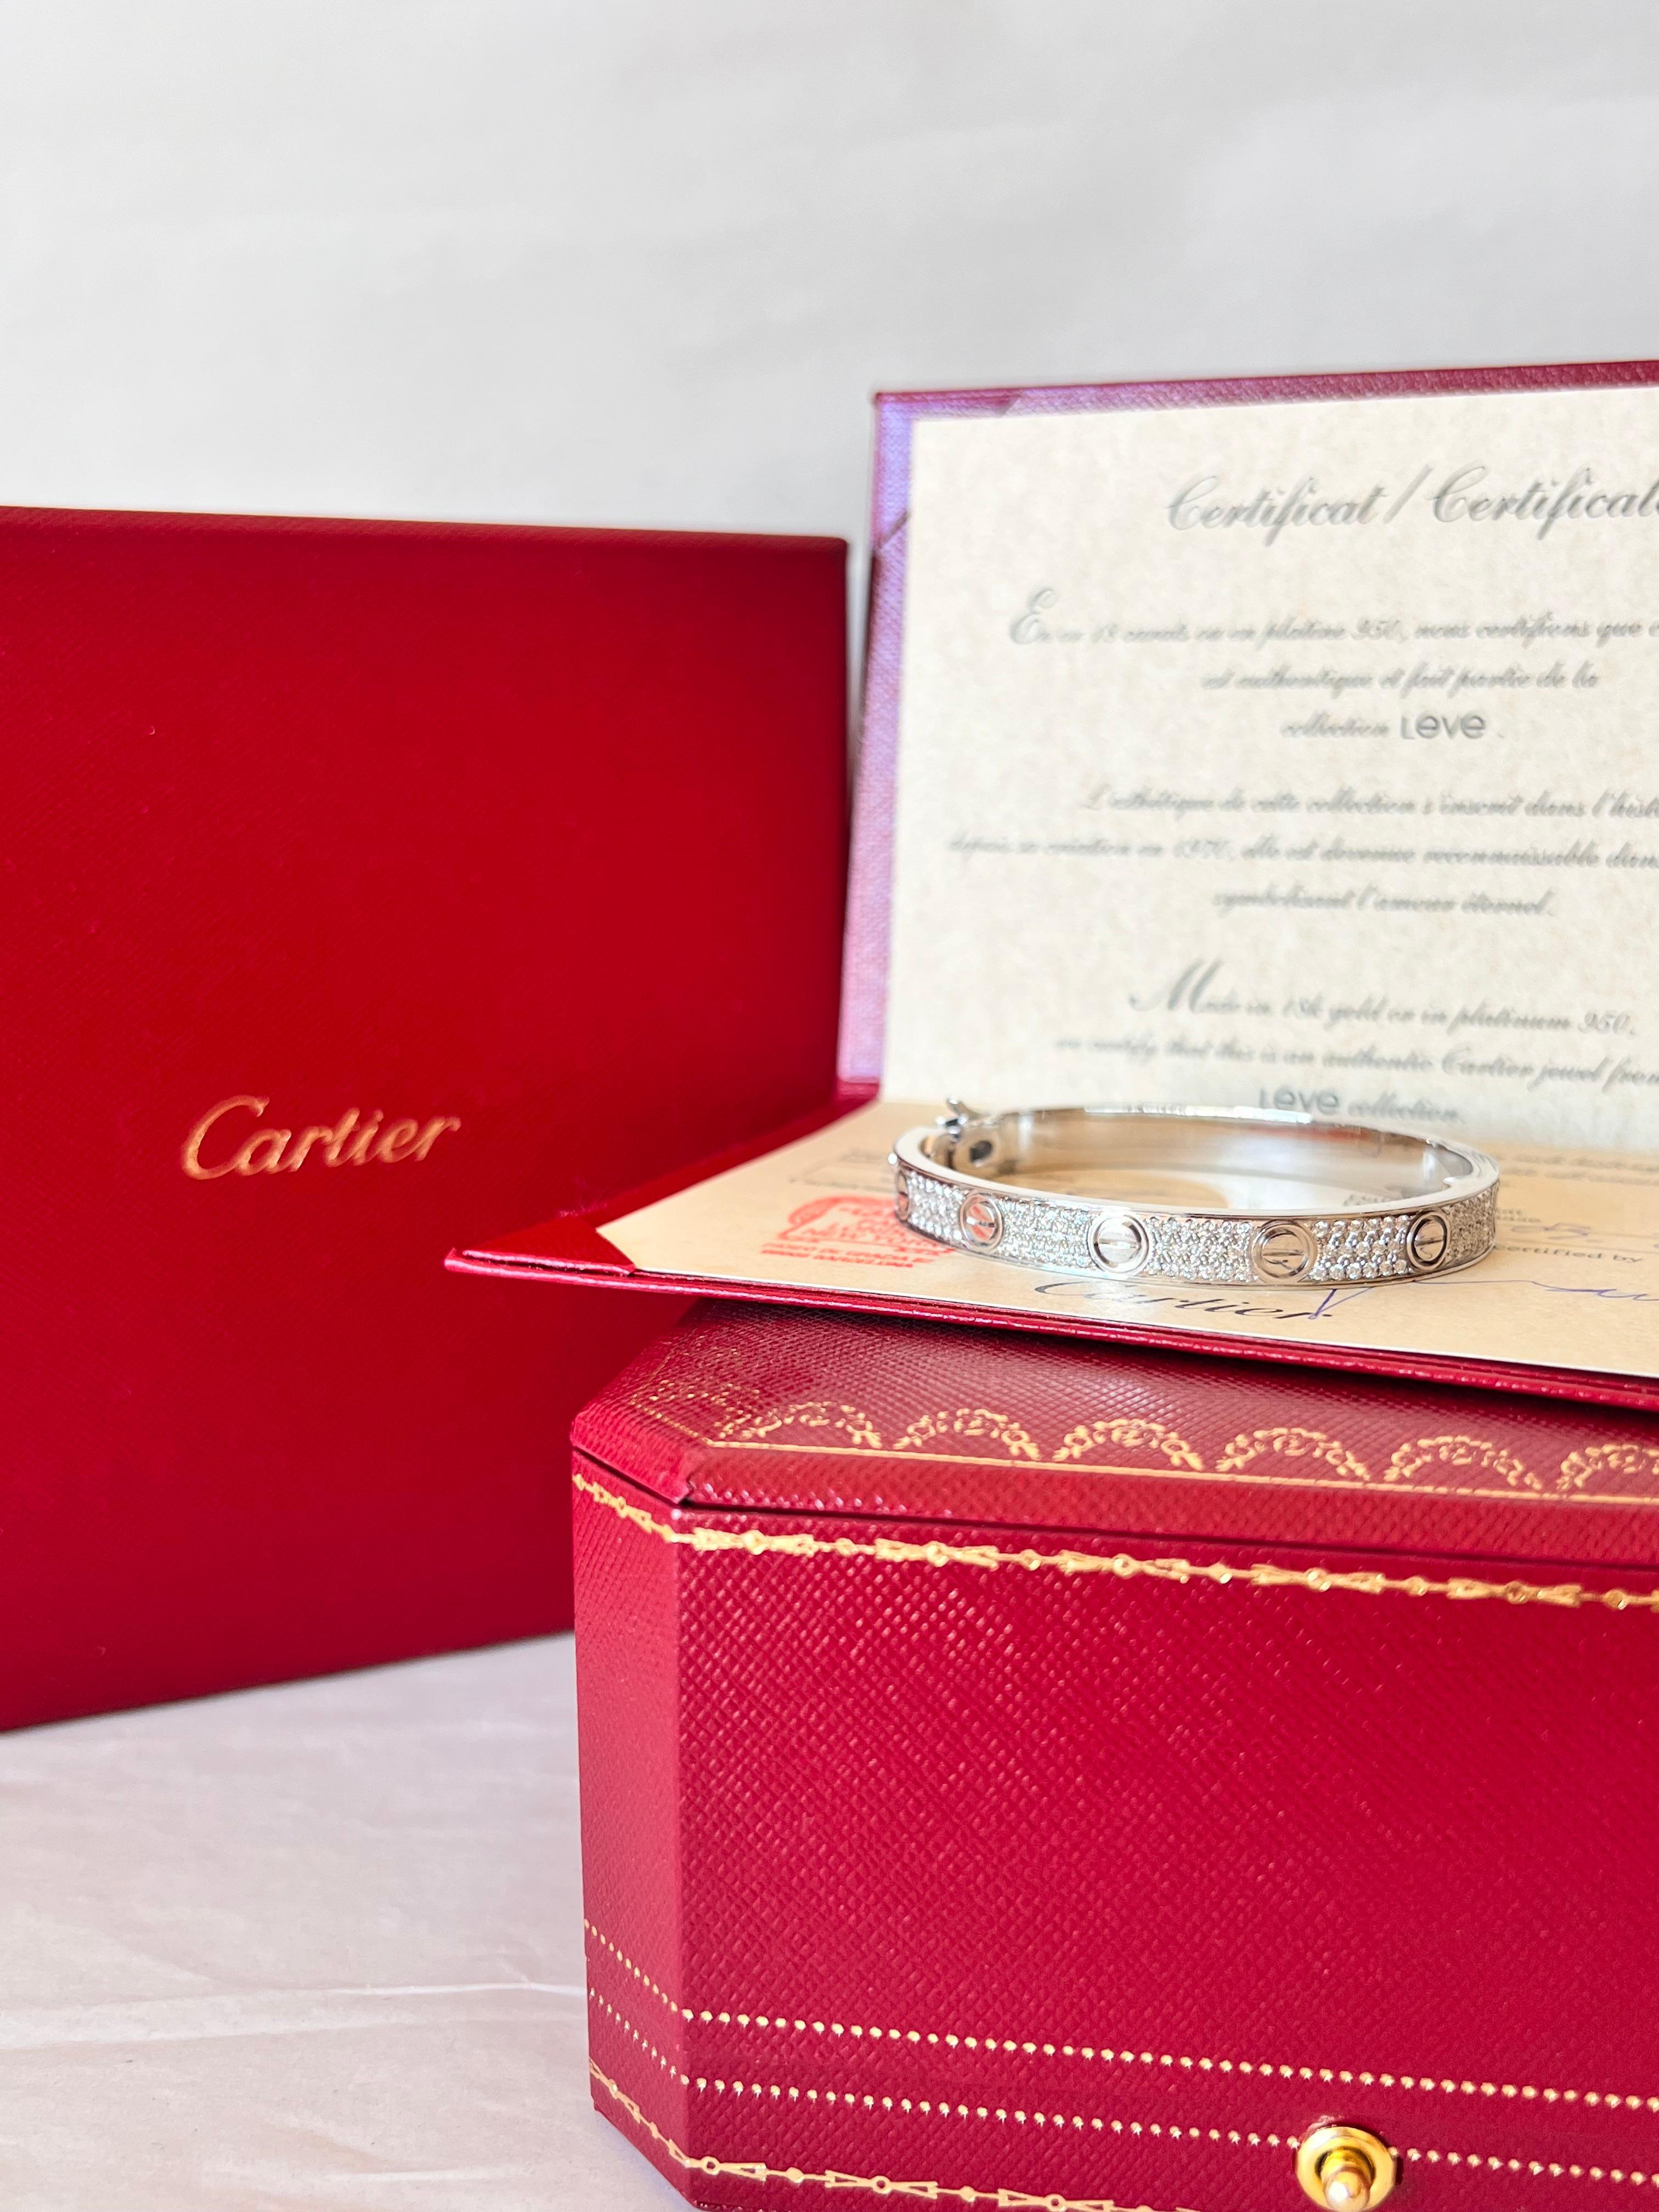 Cartier LOVE Bracelet in 18k white gold 2ct diamonds with box In Excellent Condition For Sale In Bilbao, ES